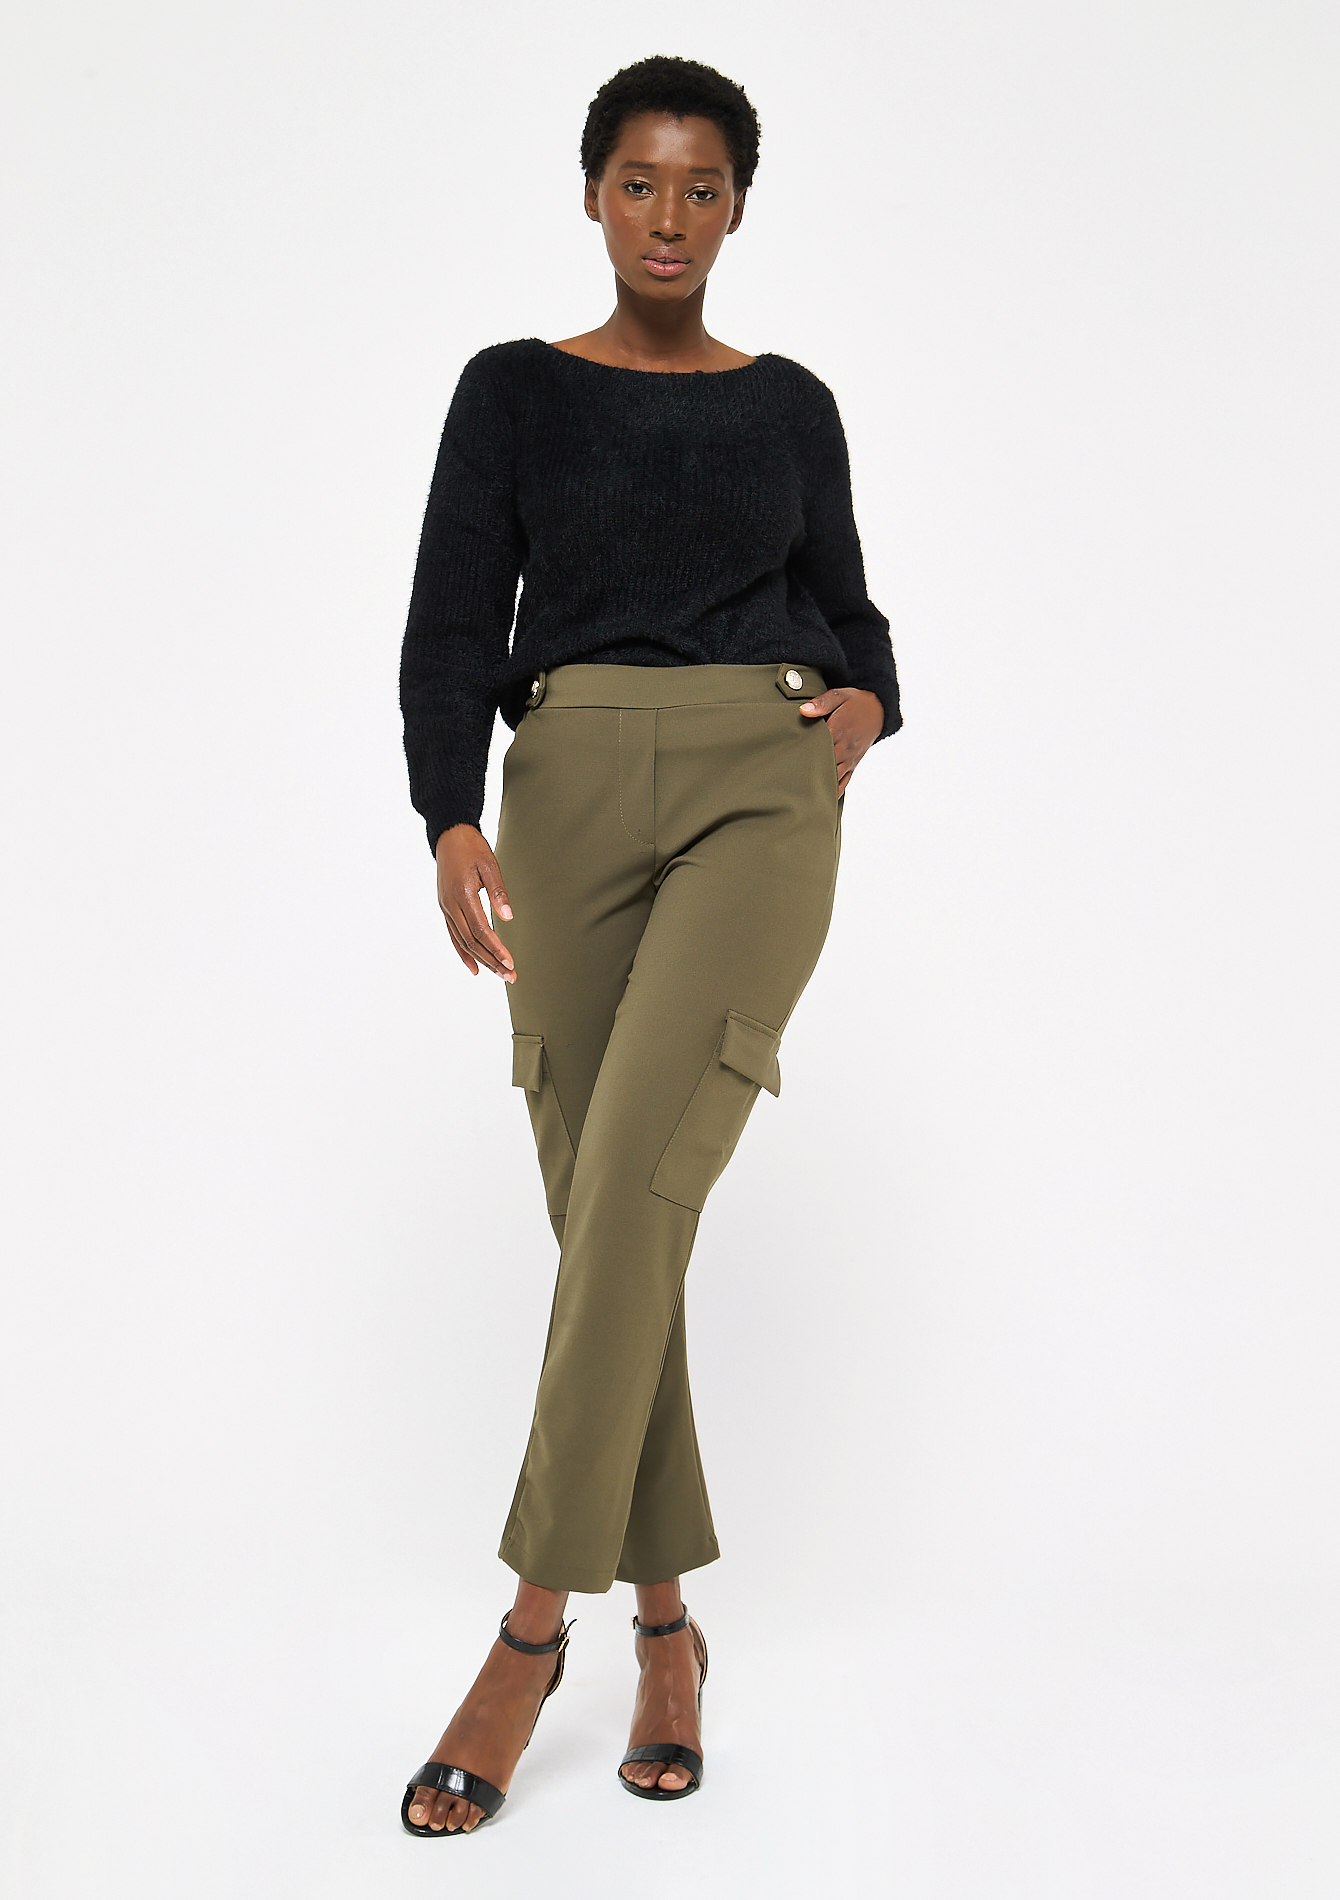 Loose-fitting cargo trousers - KHAKI ARMY - 06600519_4314